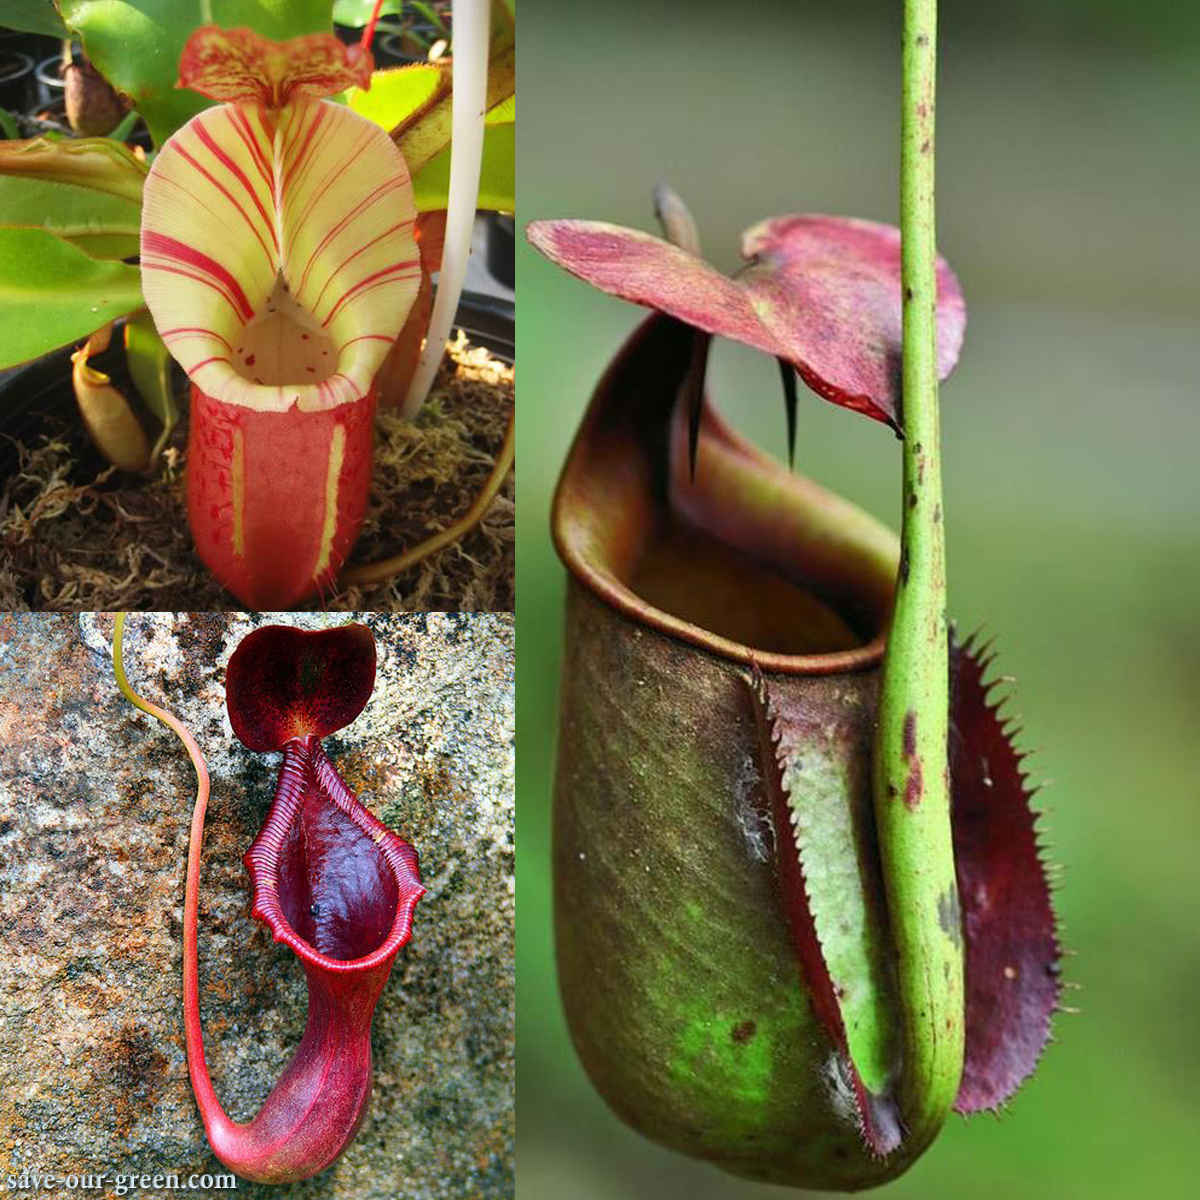 Insectivorous plant nepenthes